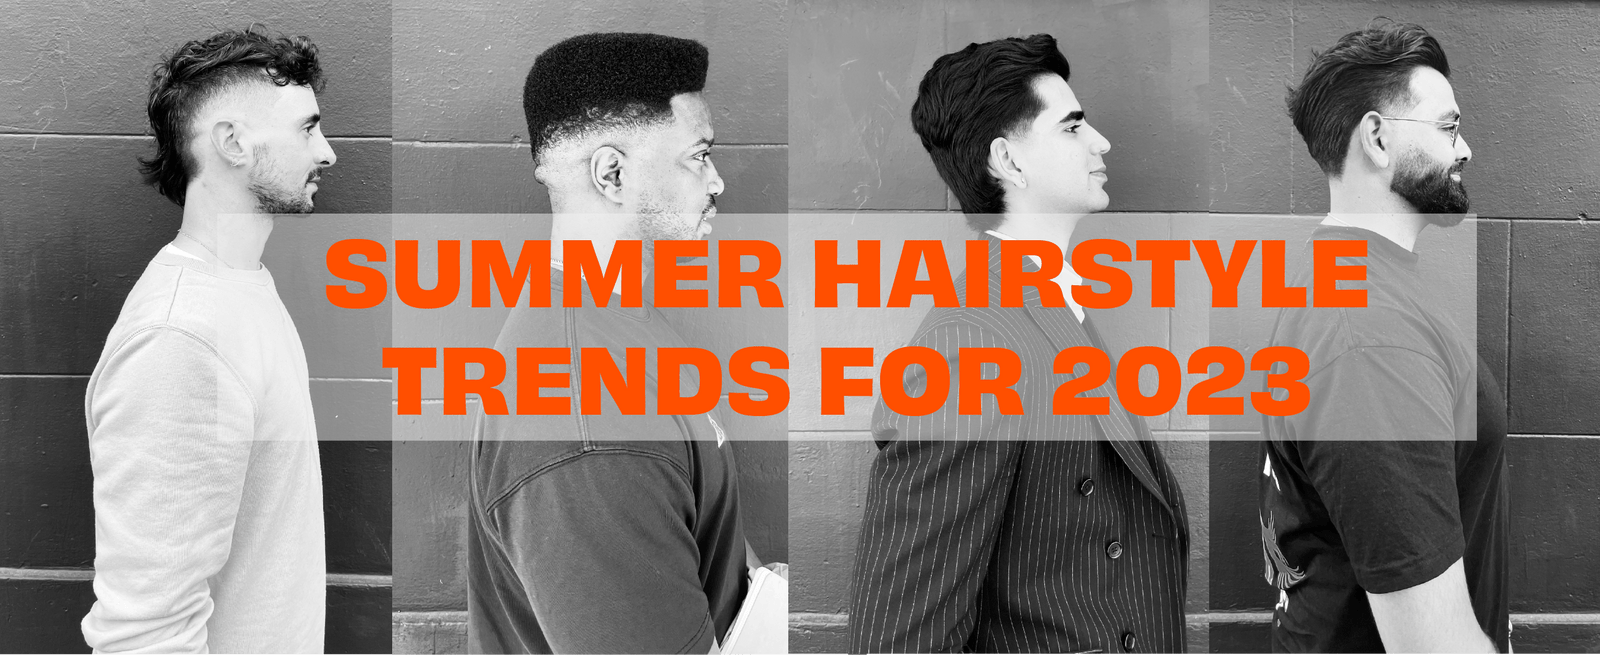 Trendiest Summer Hairstyles & Botanical Hair Care Products For Men